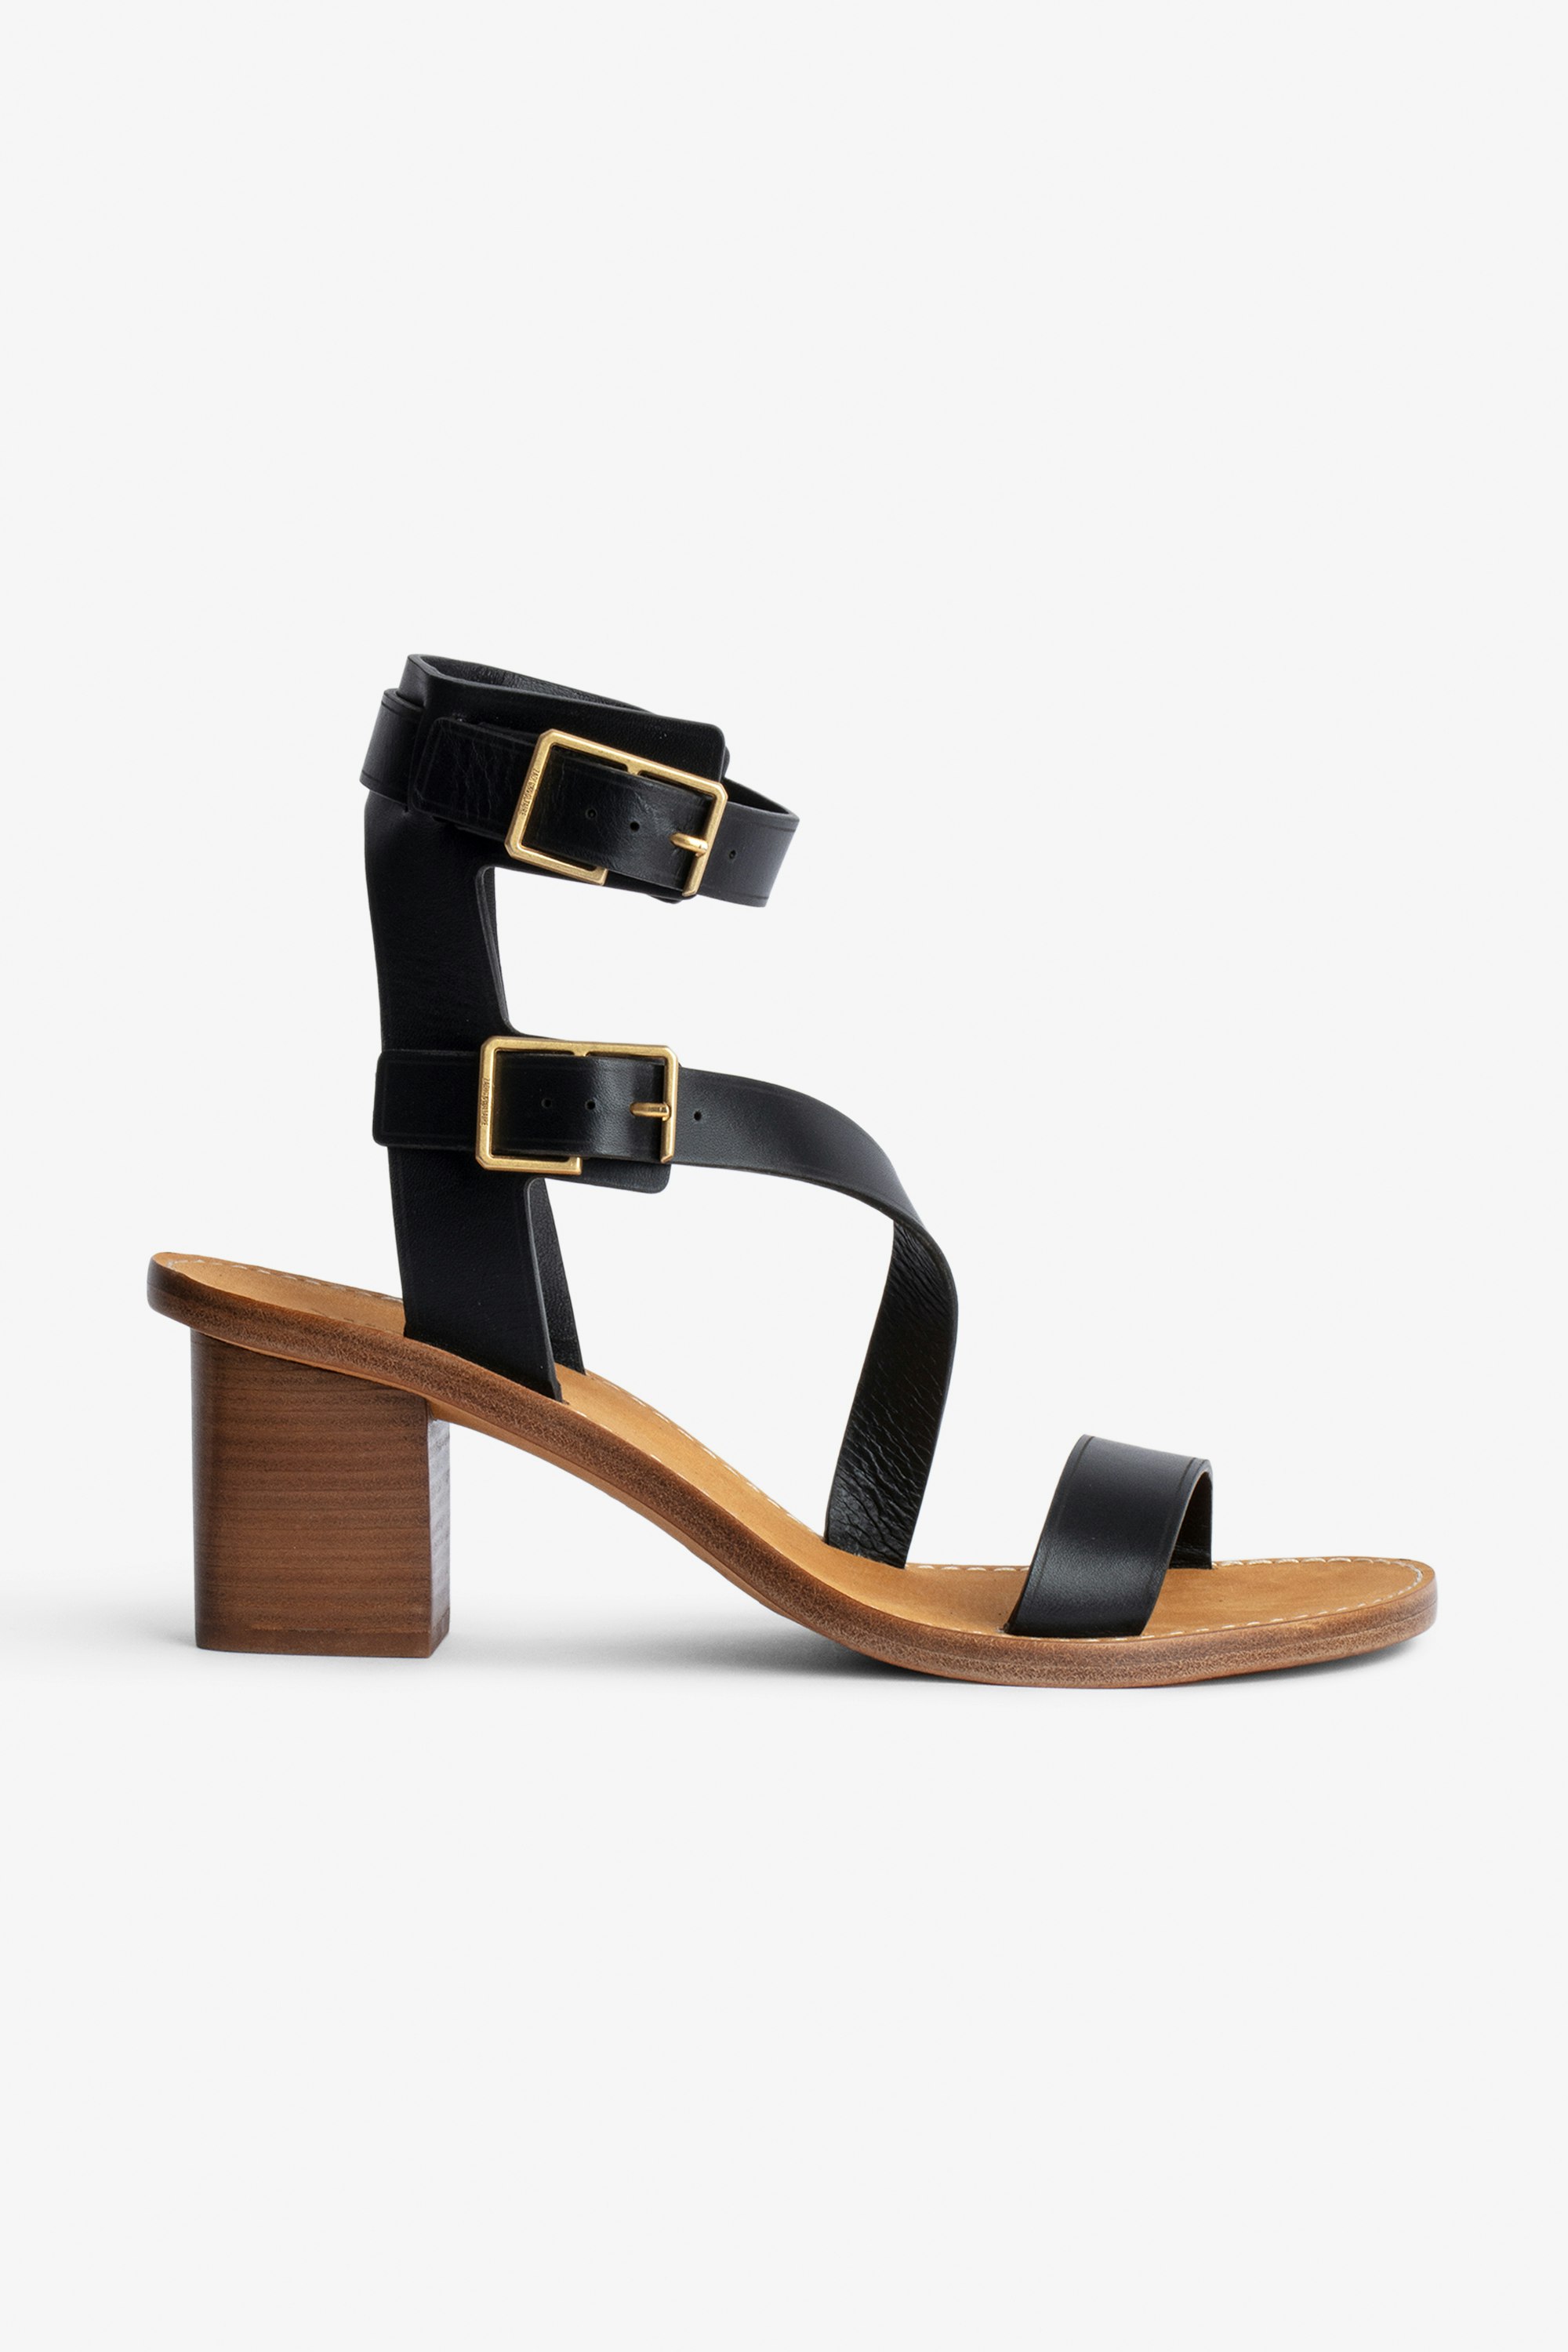 Cecilia Caprese Sandals Women's high-top smooth black leather sandals with straps and C-shaped buckles